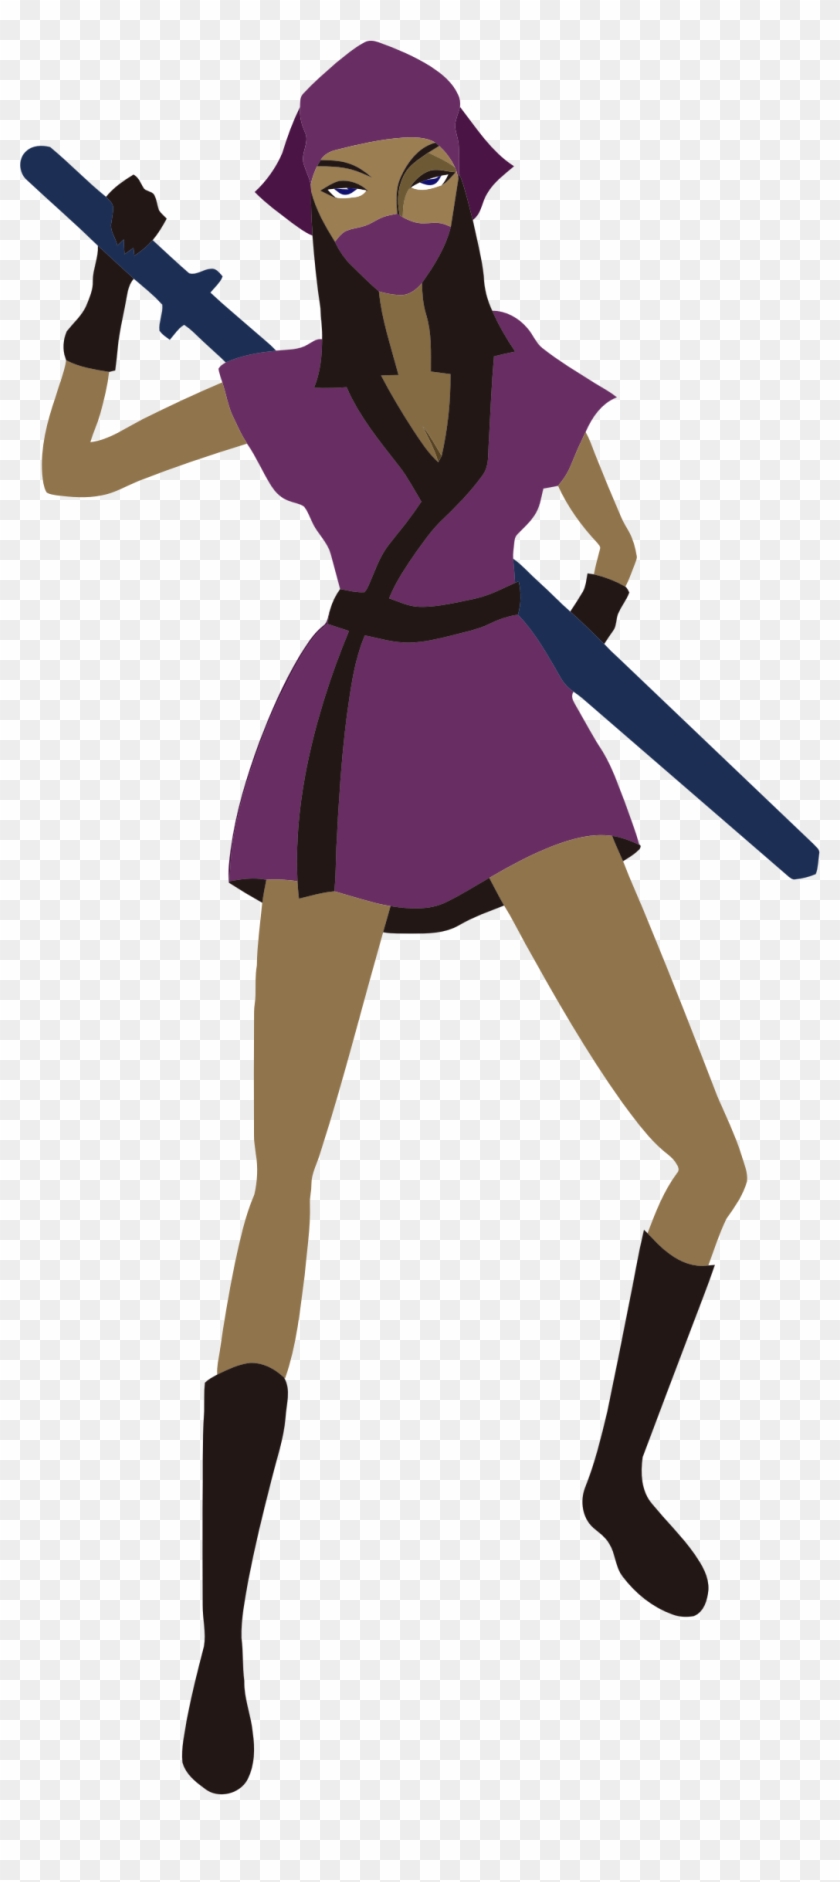 This Free Icons Png Design Of Female Ninja Clipart #537625